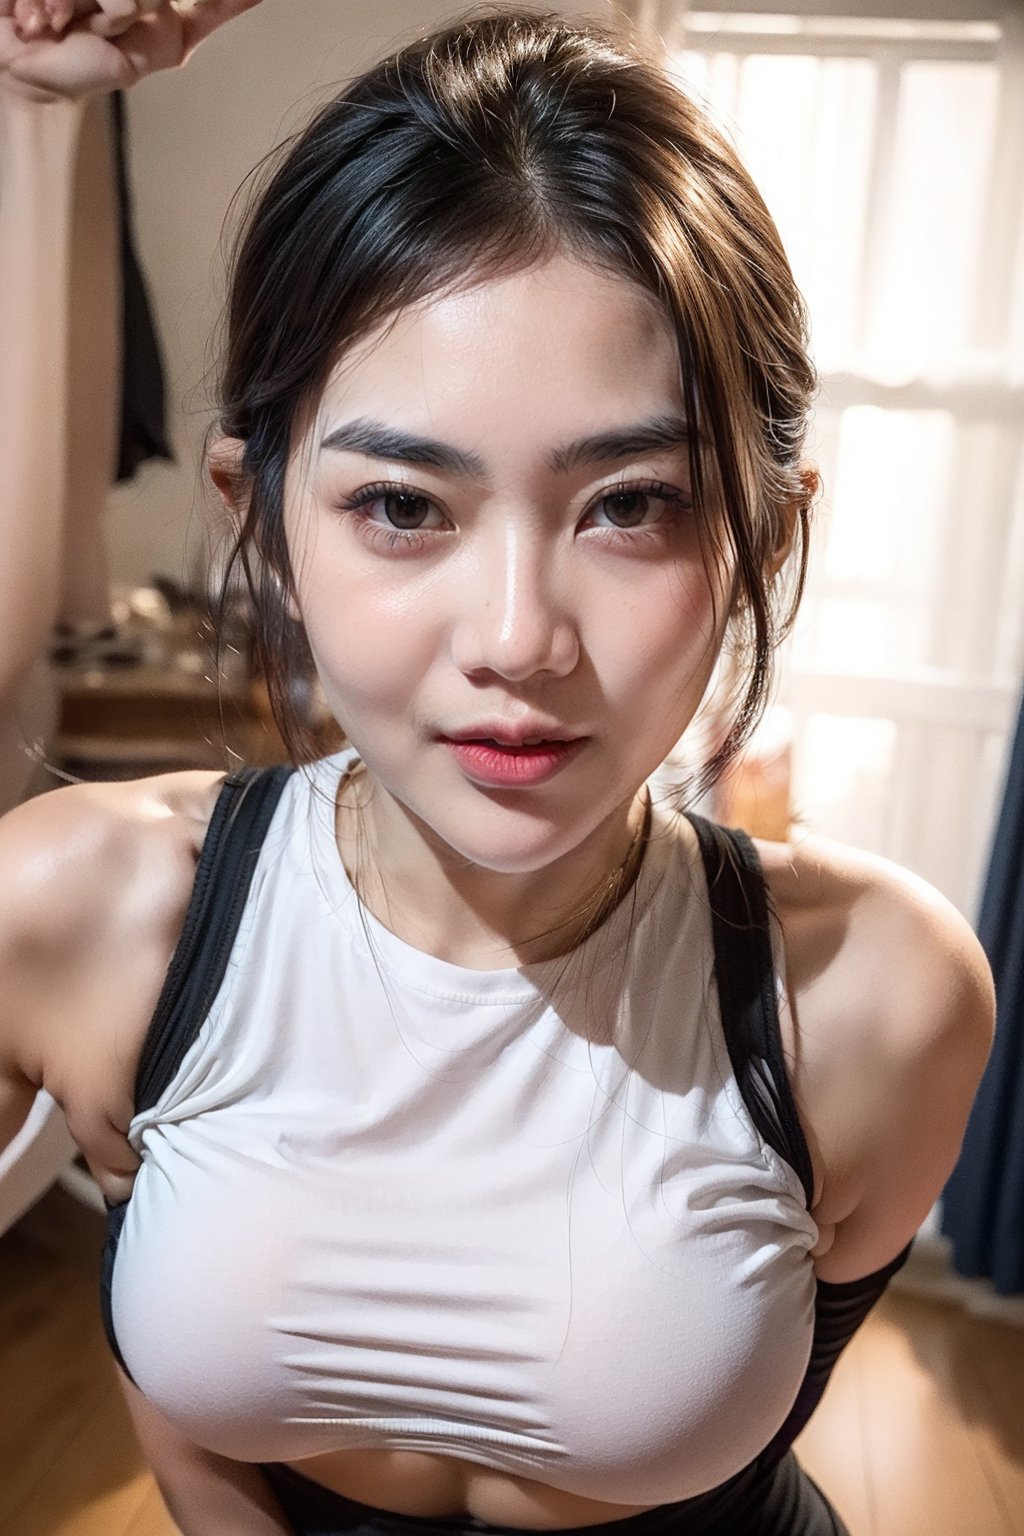 (188cm tall:1.35), 1girl, 2 heads, solo, walking, black hair, looking at viewer, (18 yo clean detailed cool girl face), strong arms, plump, (long thin chinky eyes:1.35), milf, masterpiece, best quality, realistic, wide shoulder, hair thinned, (slant-eyed:1.1), idol_faced, CN GIRL5, [1 mature wifu head], 2160P, plump arms, 1280x720, arms behind back, emeral eyes, big eyes, nose, detailed lips, detailed body, perfect body, perfect skin, standing in gym, blonde hair, long_hair, navel, 8K RAW, thicc, girl, (huge MILF hips:1.4),breasts, medium breasts, ((wearing black crop top | black legging)), eyelashes, eyeshadow, realistic hands, perfect drawing hands,ShintaGisul